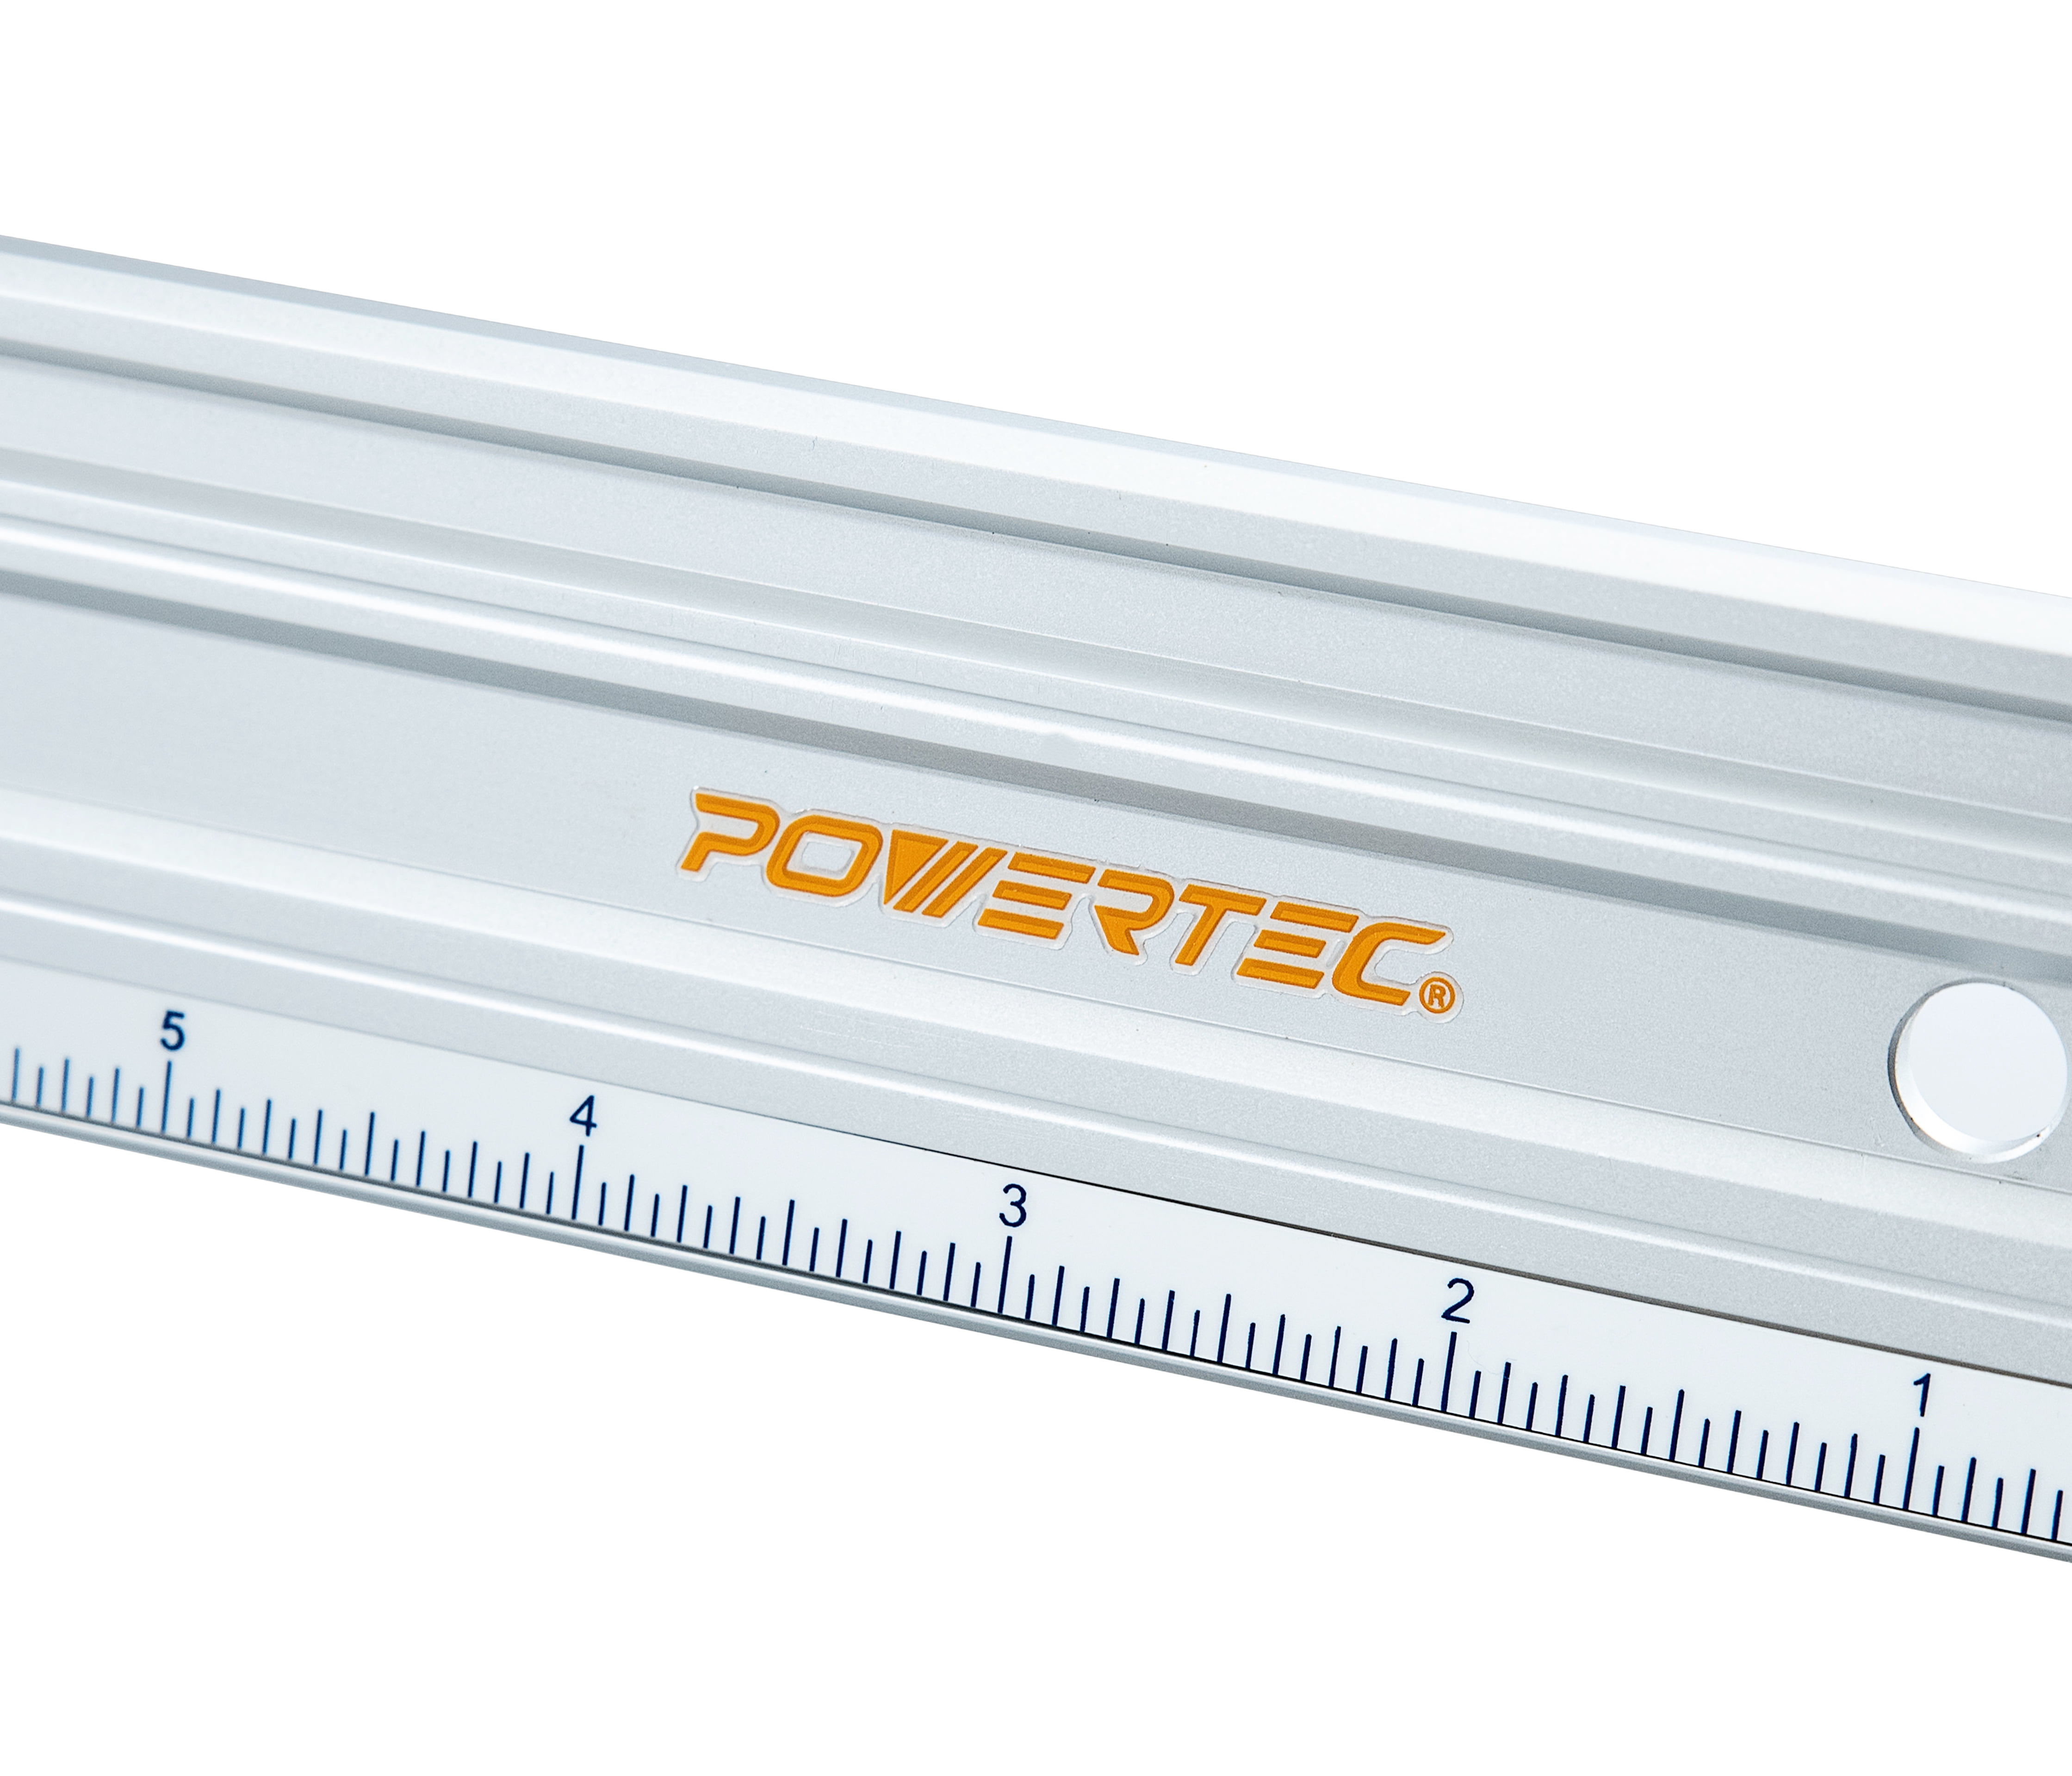 Tacoma Screw Products  Mayes 48 Straight Edge Ruler